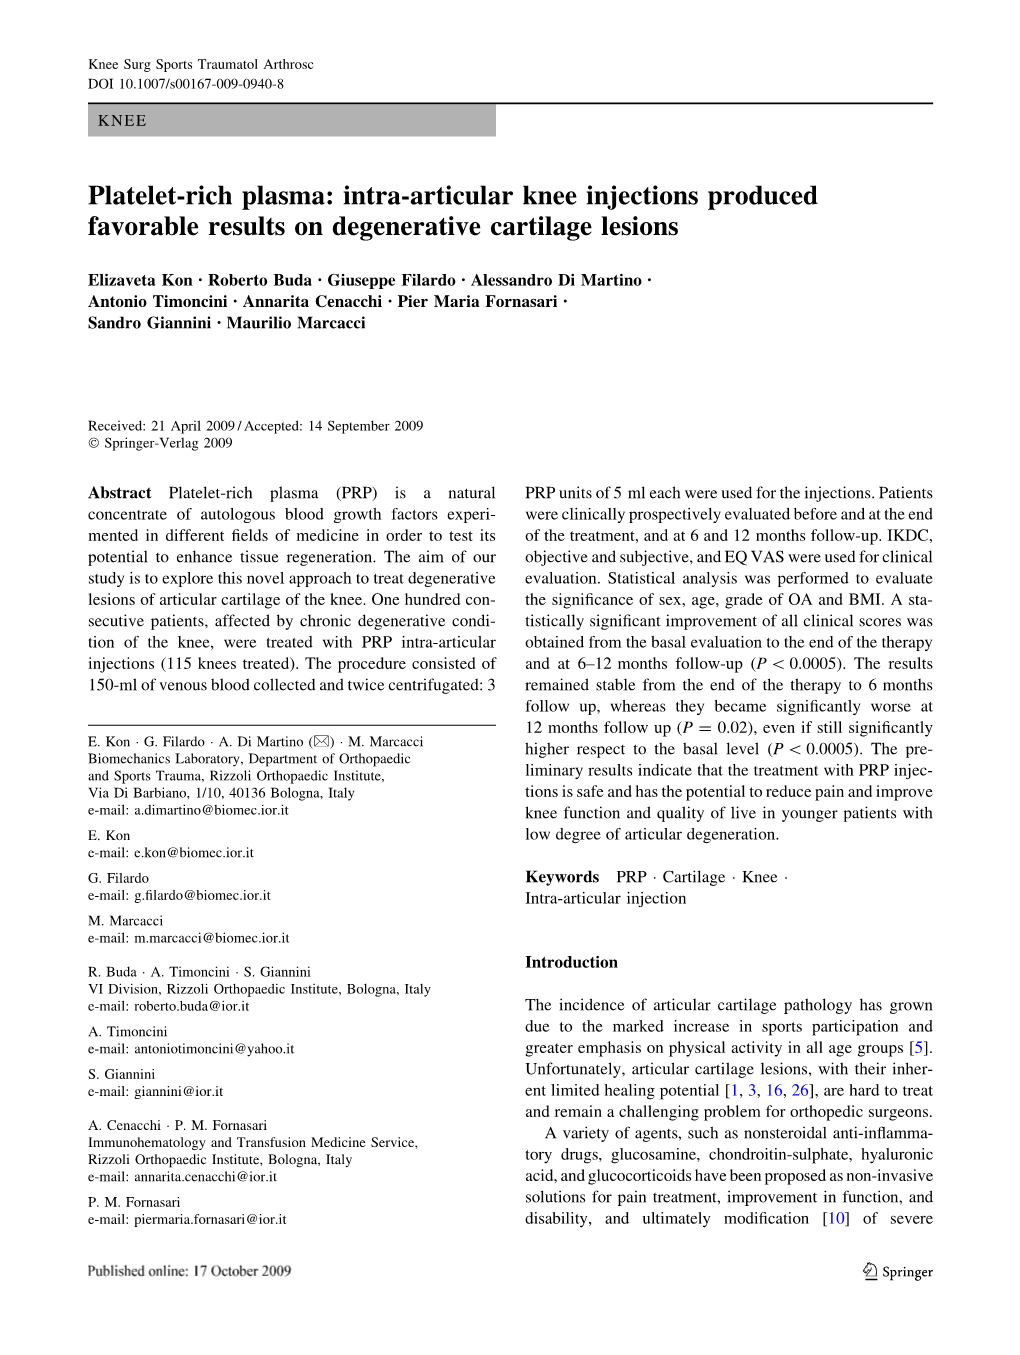 Platelet-Rich Plasma: Intra-Articular Knee Injections Produced Favorable Results on Degenerative Cartilage Lesions